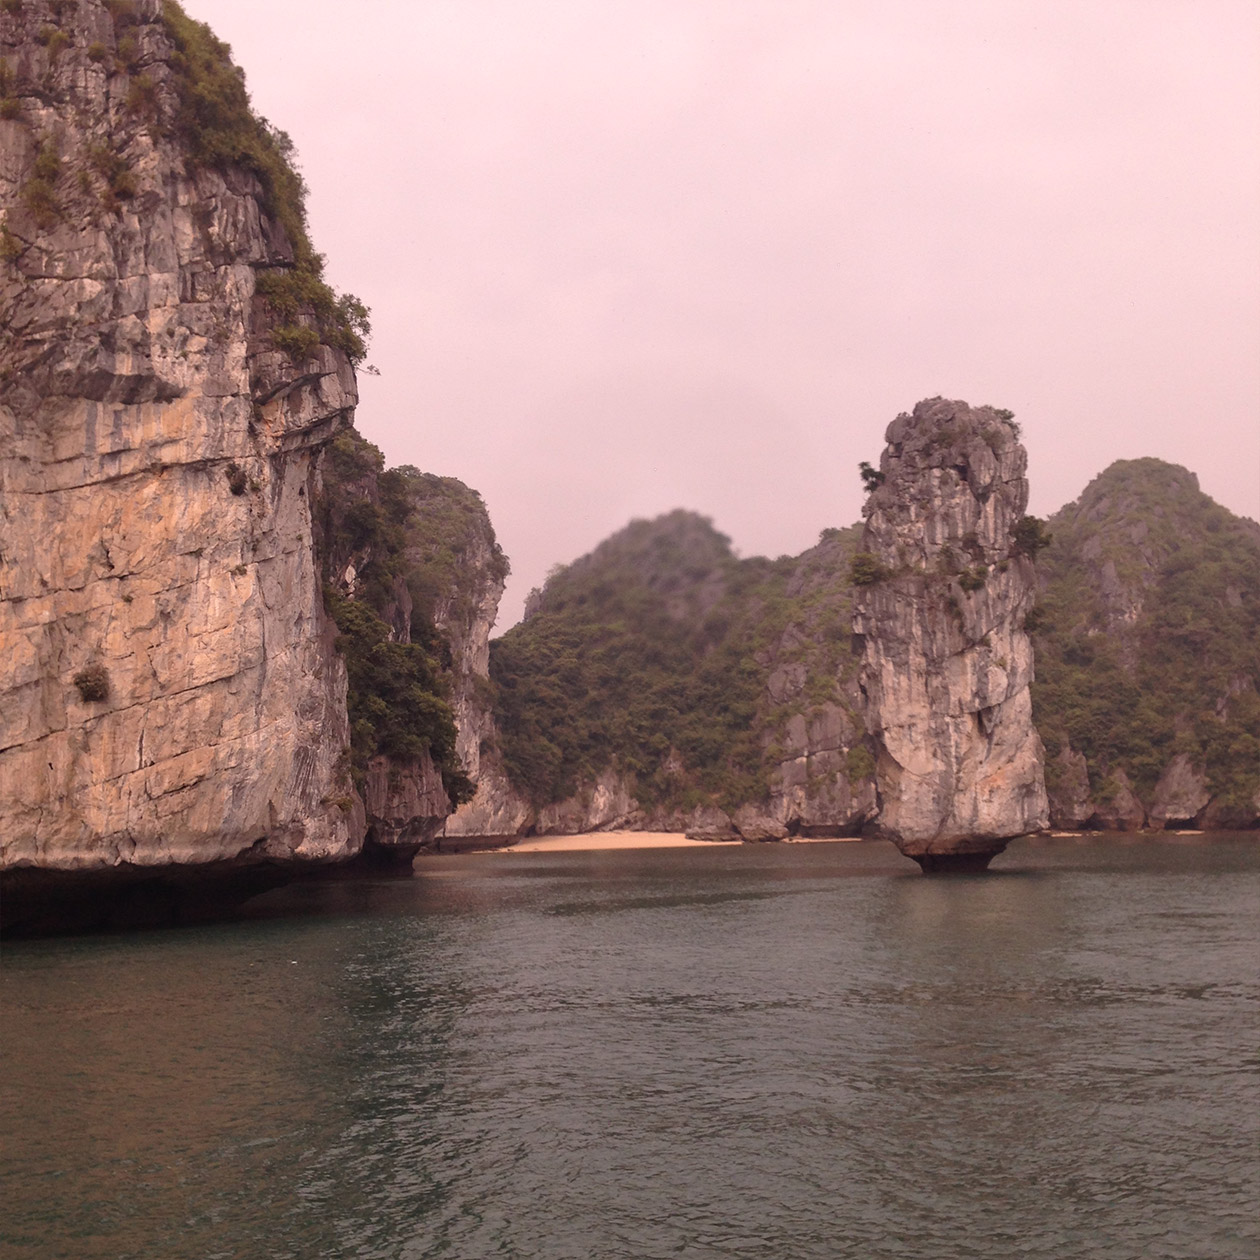 Stone cliffs in the Hạ Long Bay.